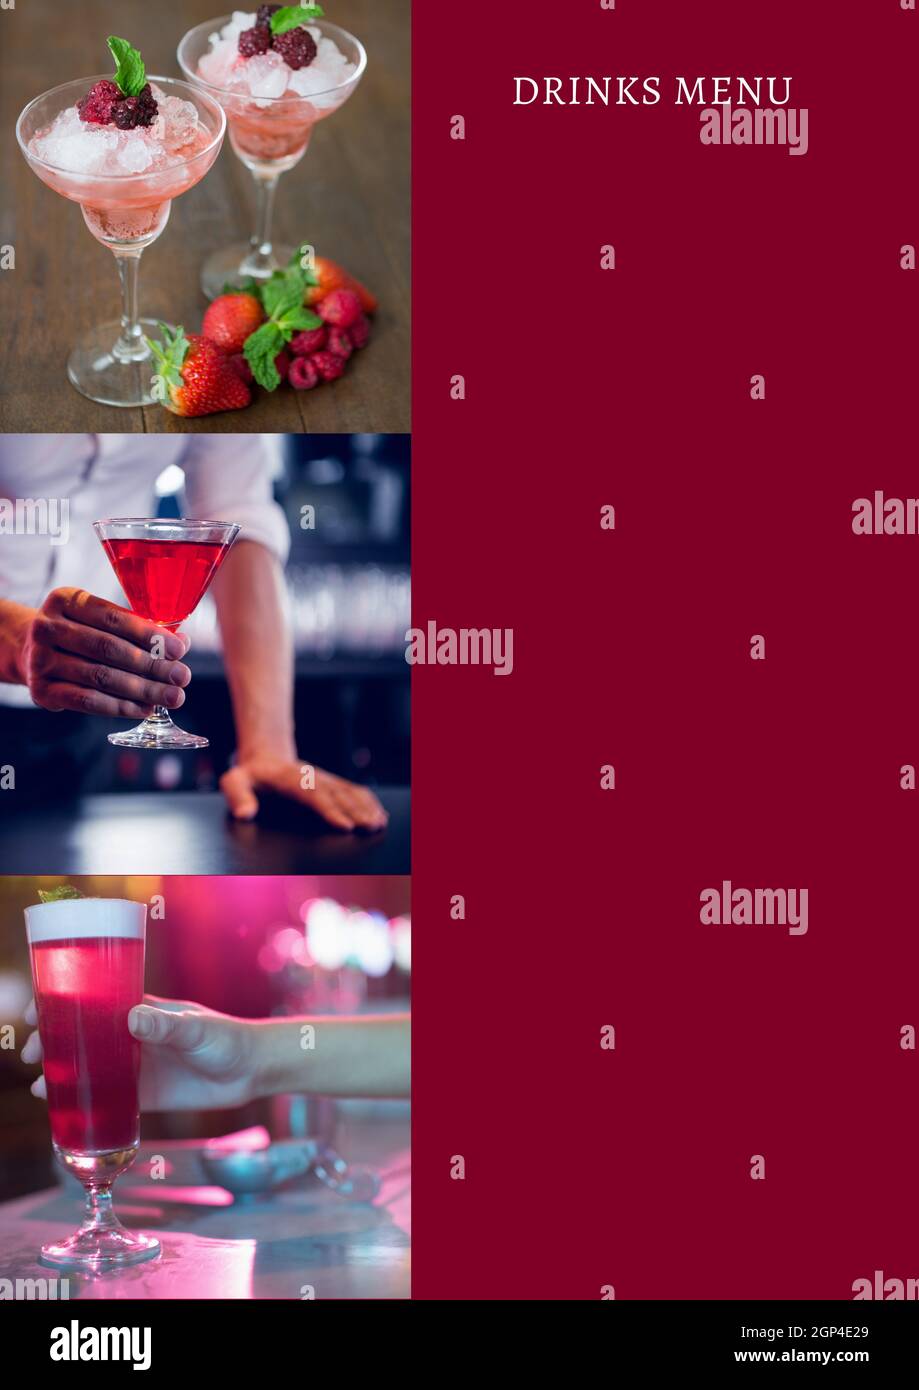 Composition of drinks menu text and cocktails in bar on red background Stock Photo